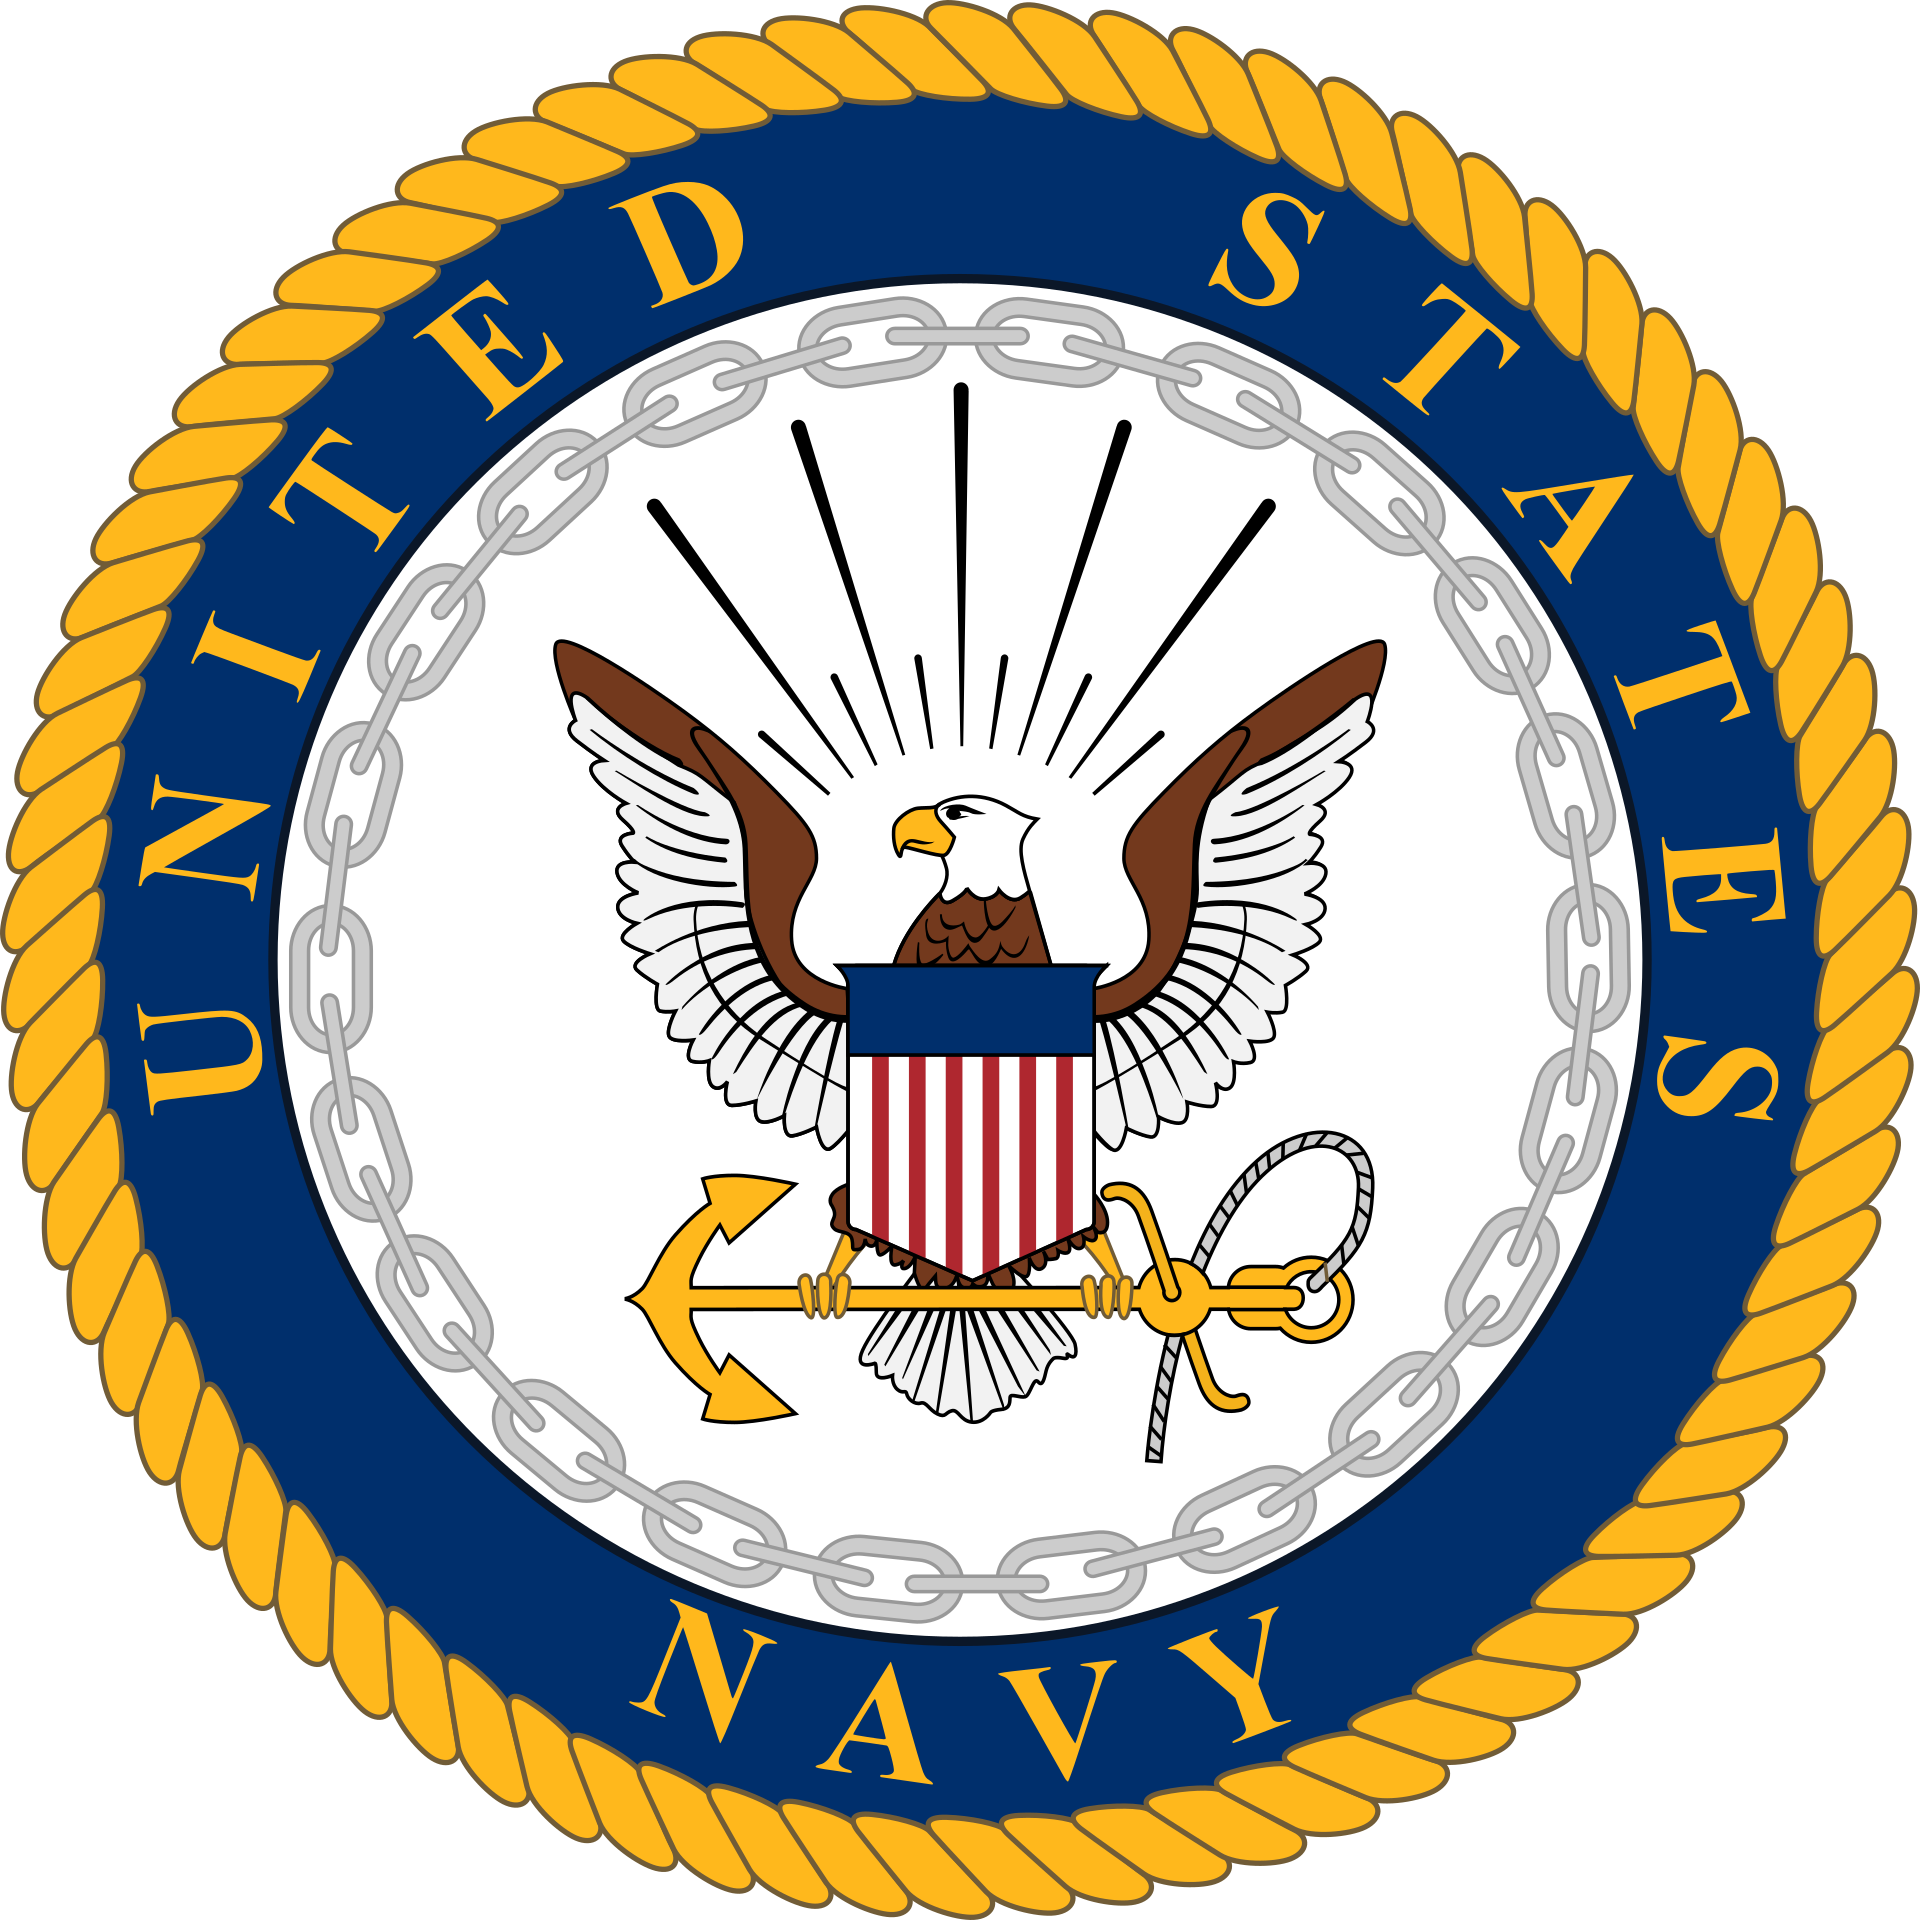 1920px-Emblem_of_the_United_States_Navy.svg.png